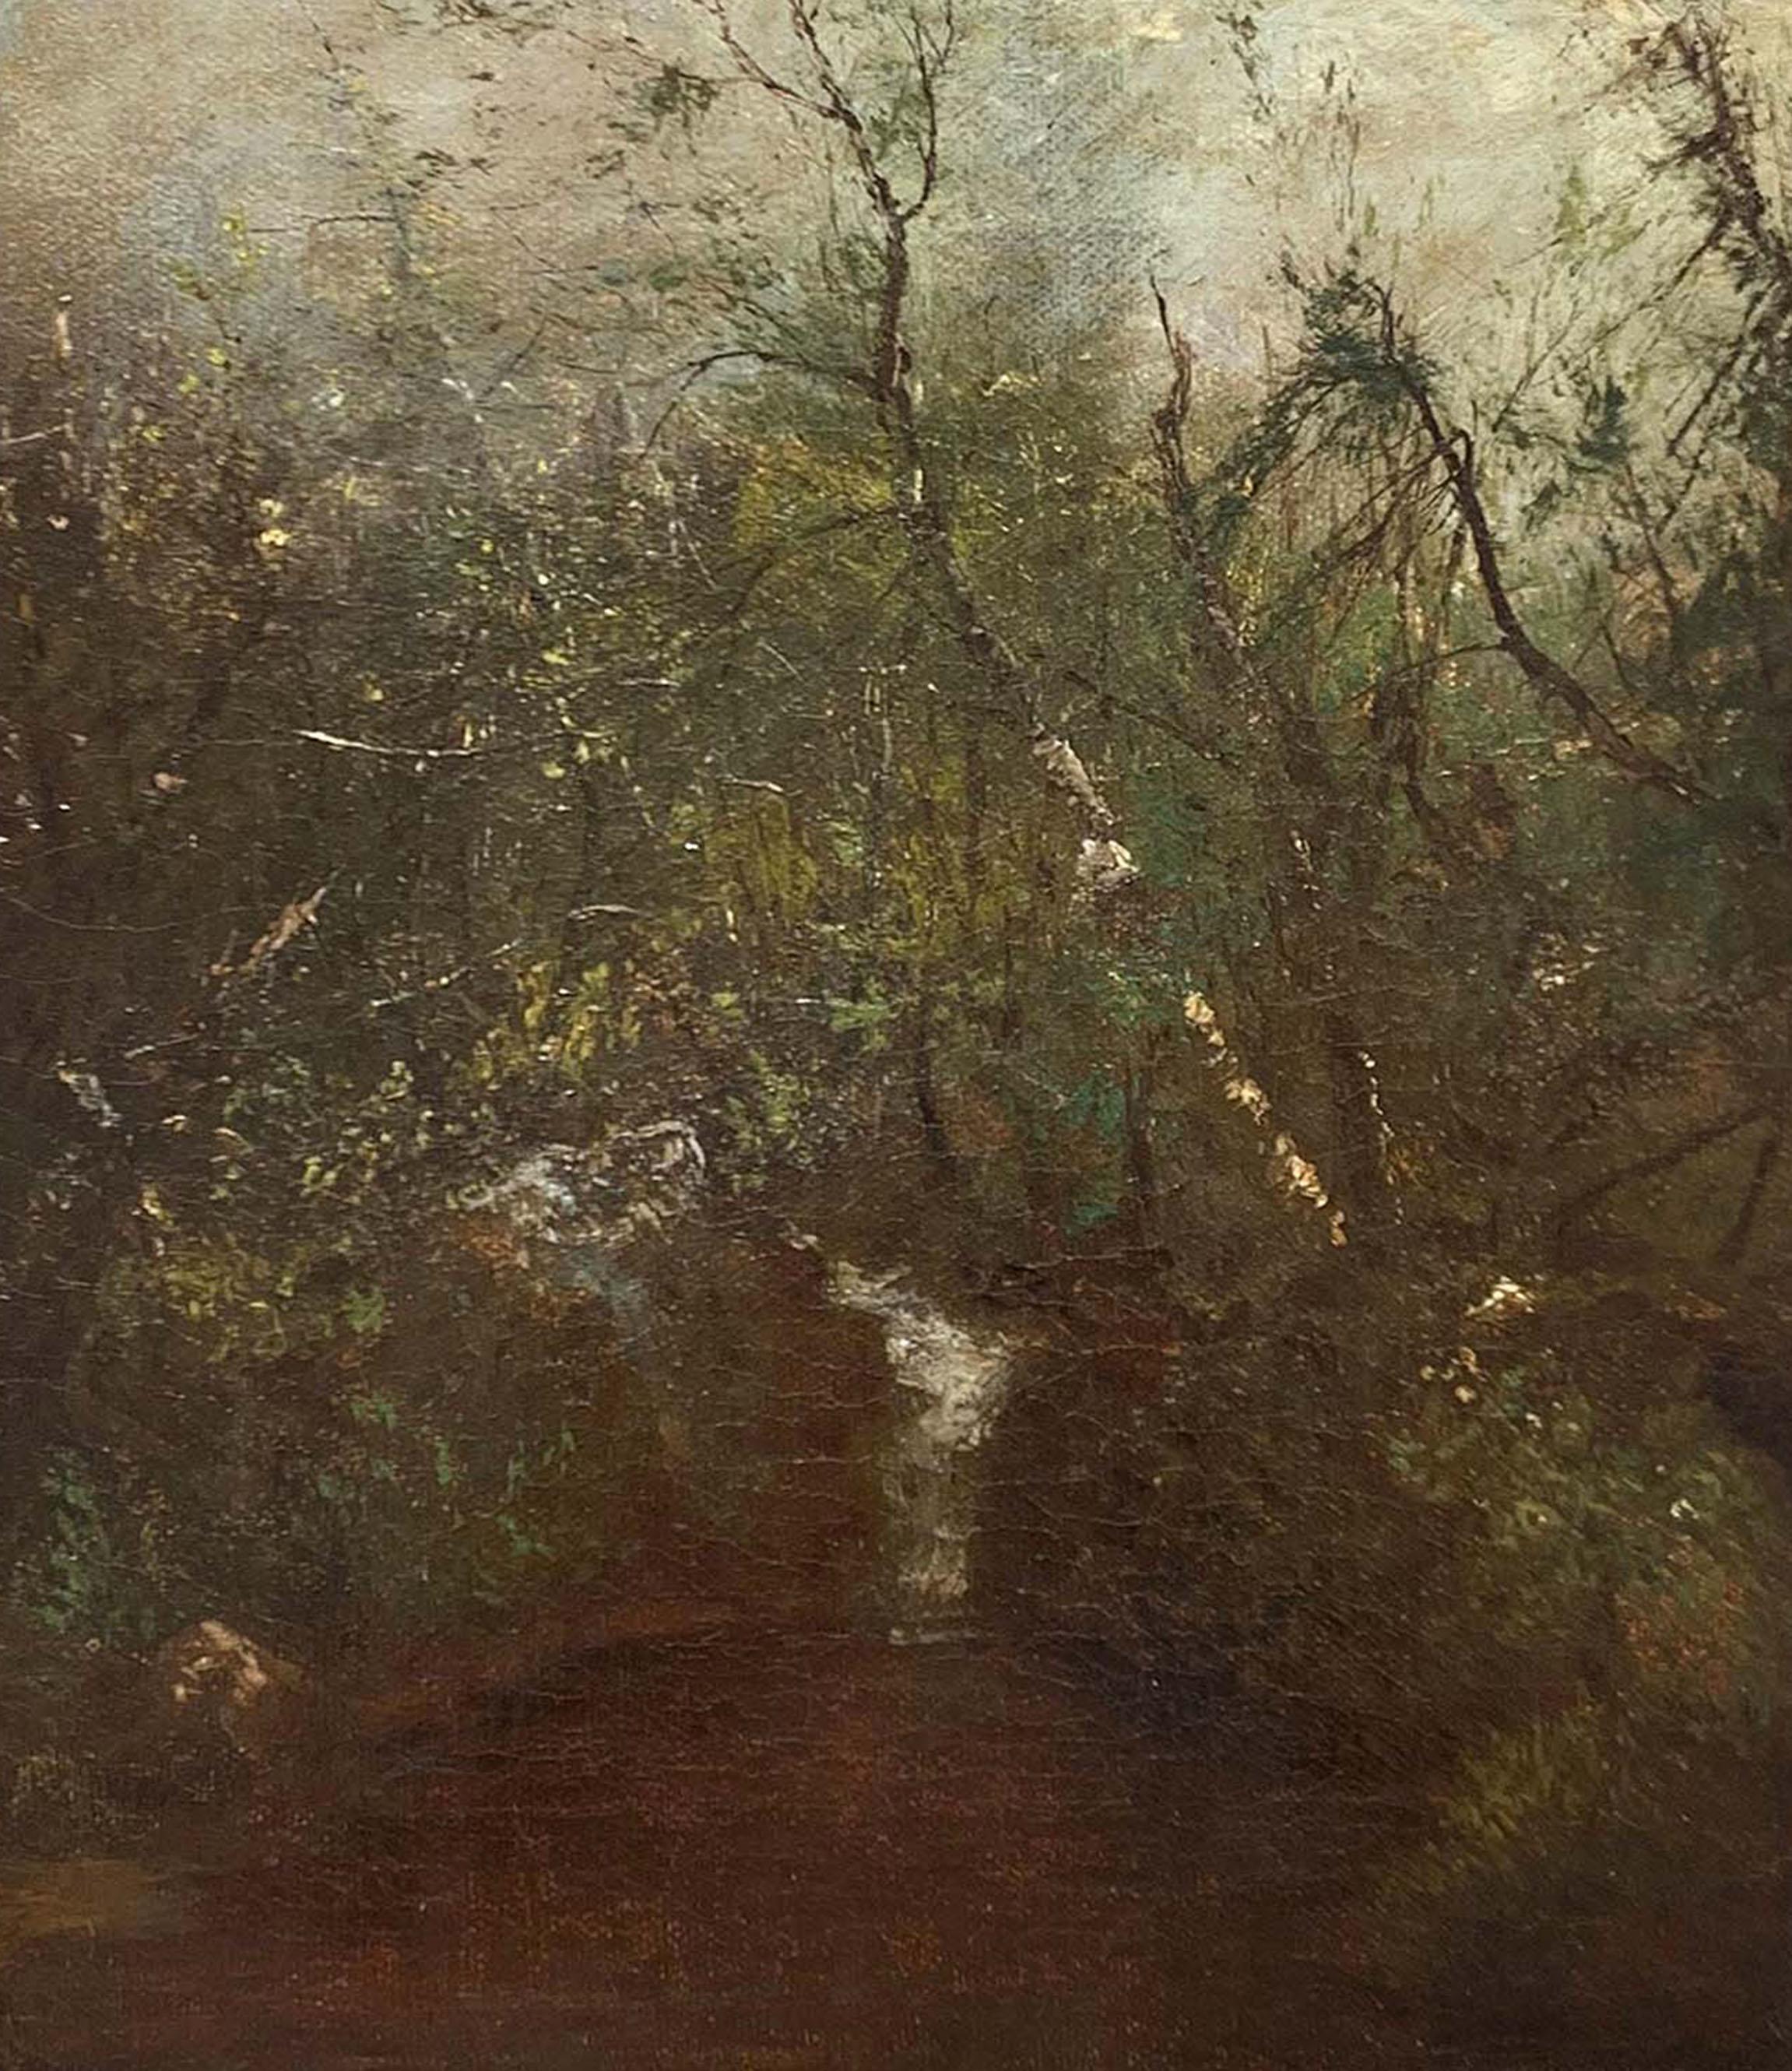 JOHN FREDERICK KENSETT (1816-1872)
Woodland Waterfall
Oil on canvas
14 x 12 inches
Signed lower right


